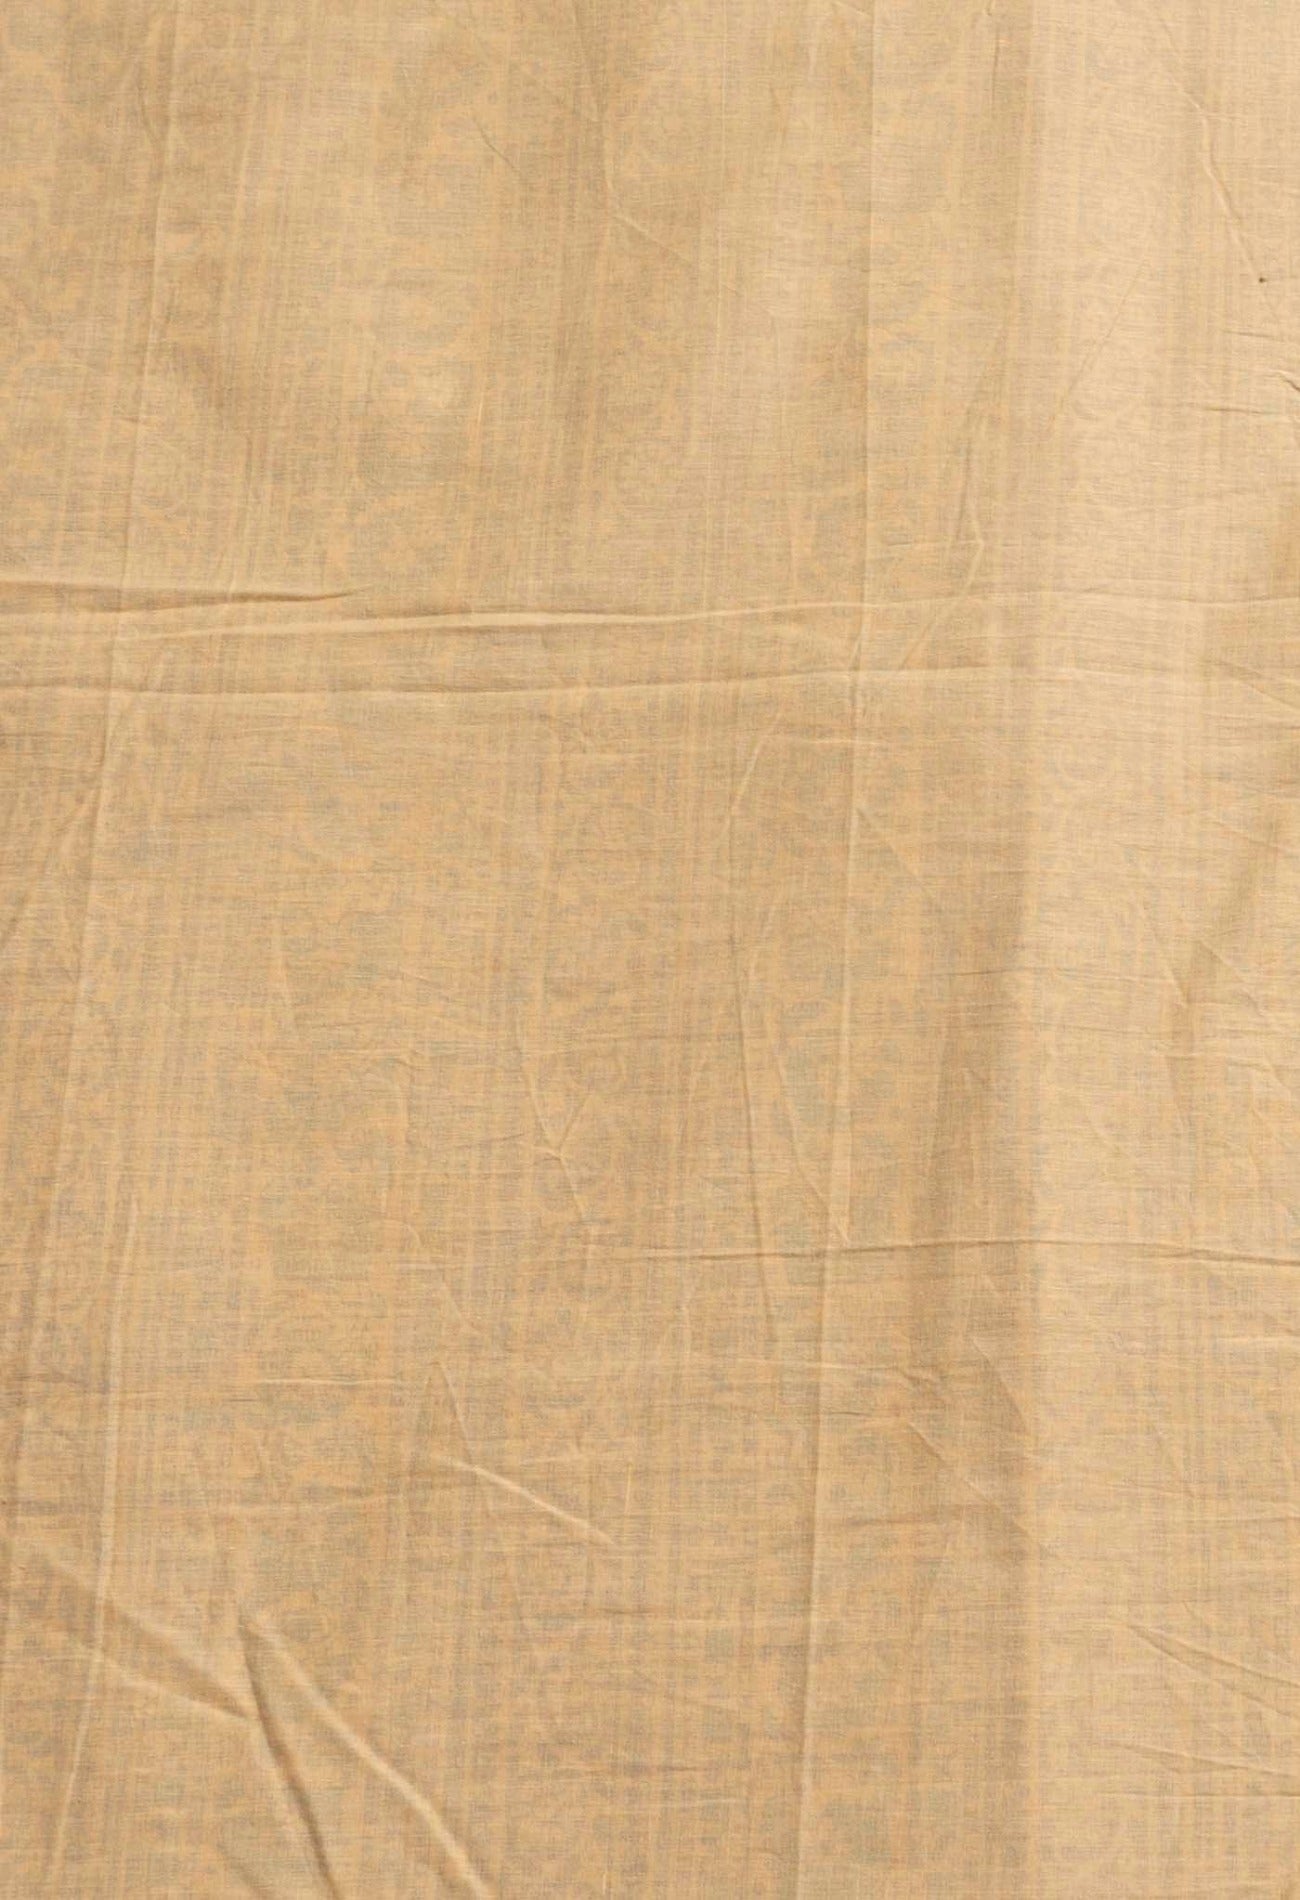 Online Shopping for Brown Pure Block Printed Mulmul Cotton Saree with Hand Block Prints from Rajasthan at Unnatisilks.comIndia
